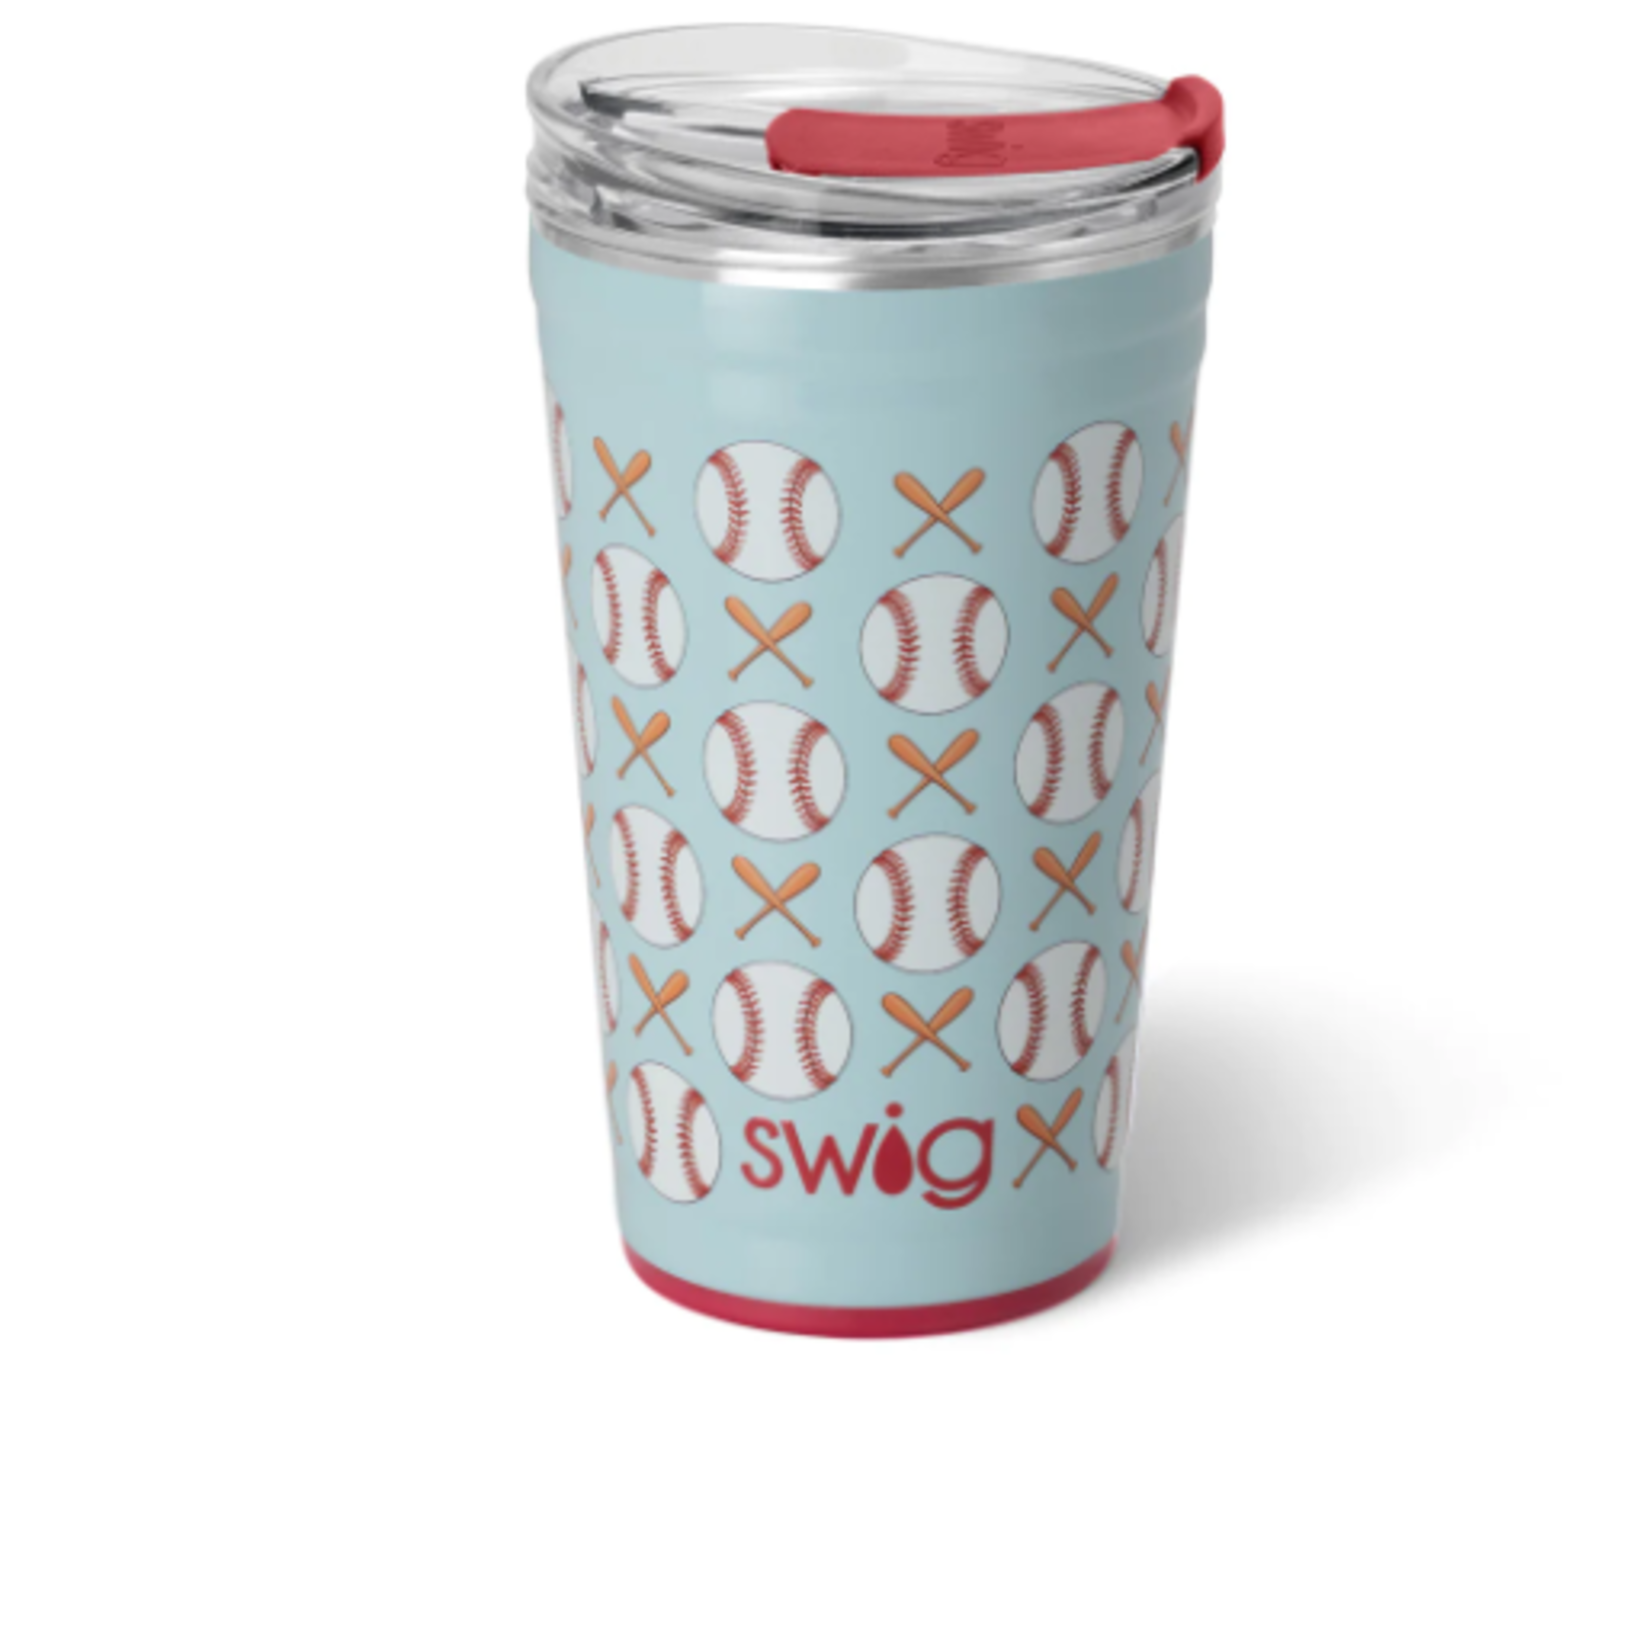 Swig Home Run Party Cup (24oz)